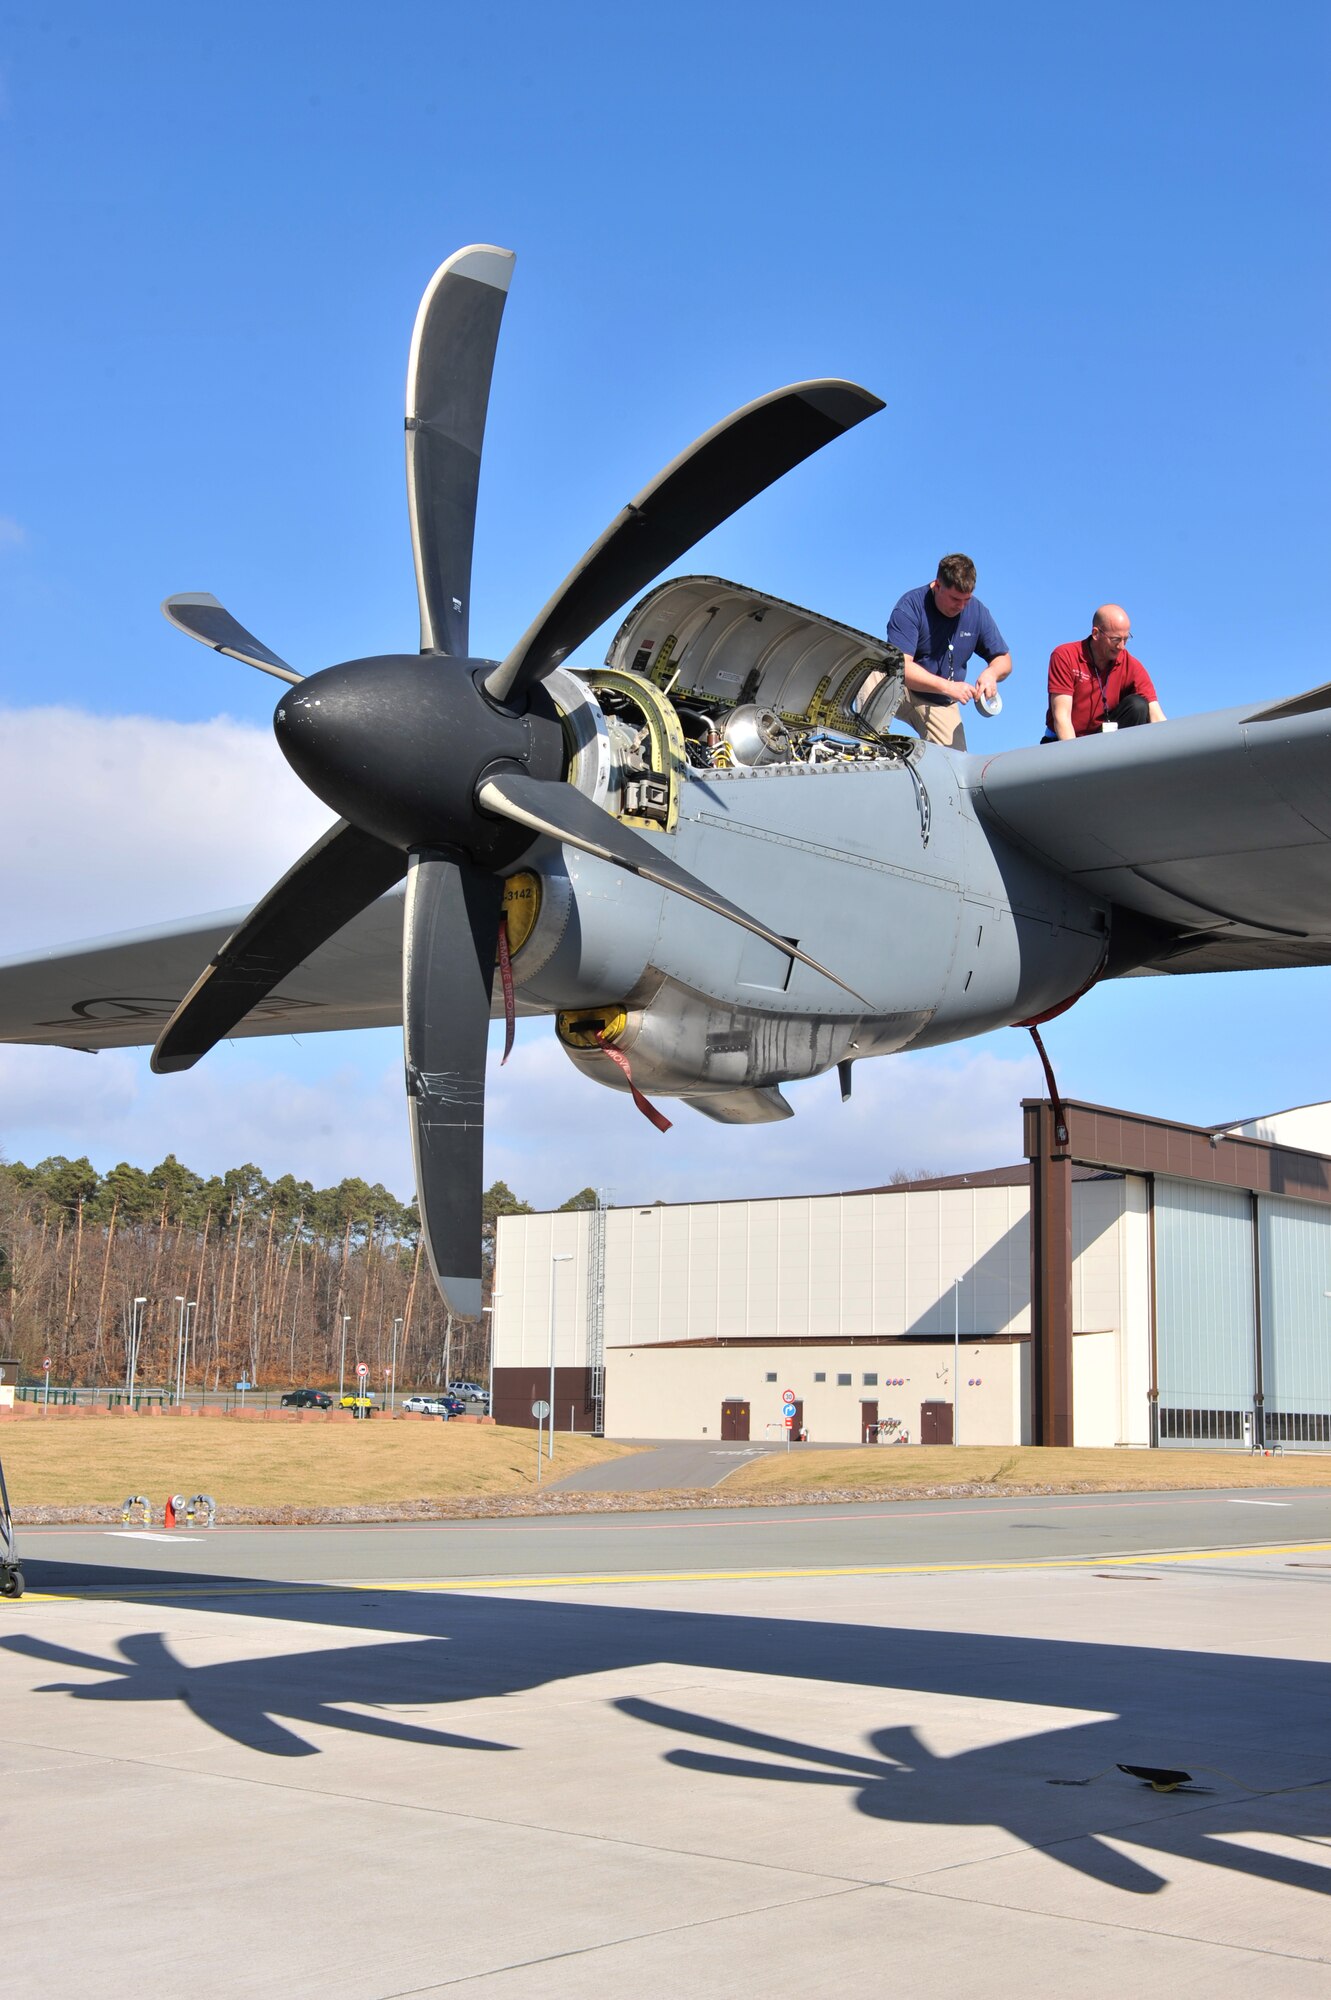 George Evans, Rolls-Royce mechanic, and Ben Choates, Air Force Engineering Technical Services mechanic, perform maintenance and run a series of tests on the engine of a C-130J Super Hercules, Ramstein Air Base, Germany, March 12, 2012. The Rolls-Royce Company builds aircraft engines as well as provides support for maintenance. (U.S. Air Force photo/ Airman 1st Class Caitlin O'Neil-McKeown)